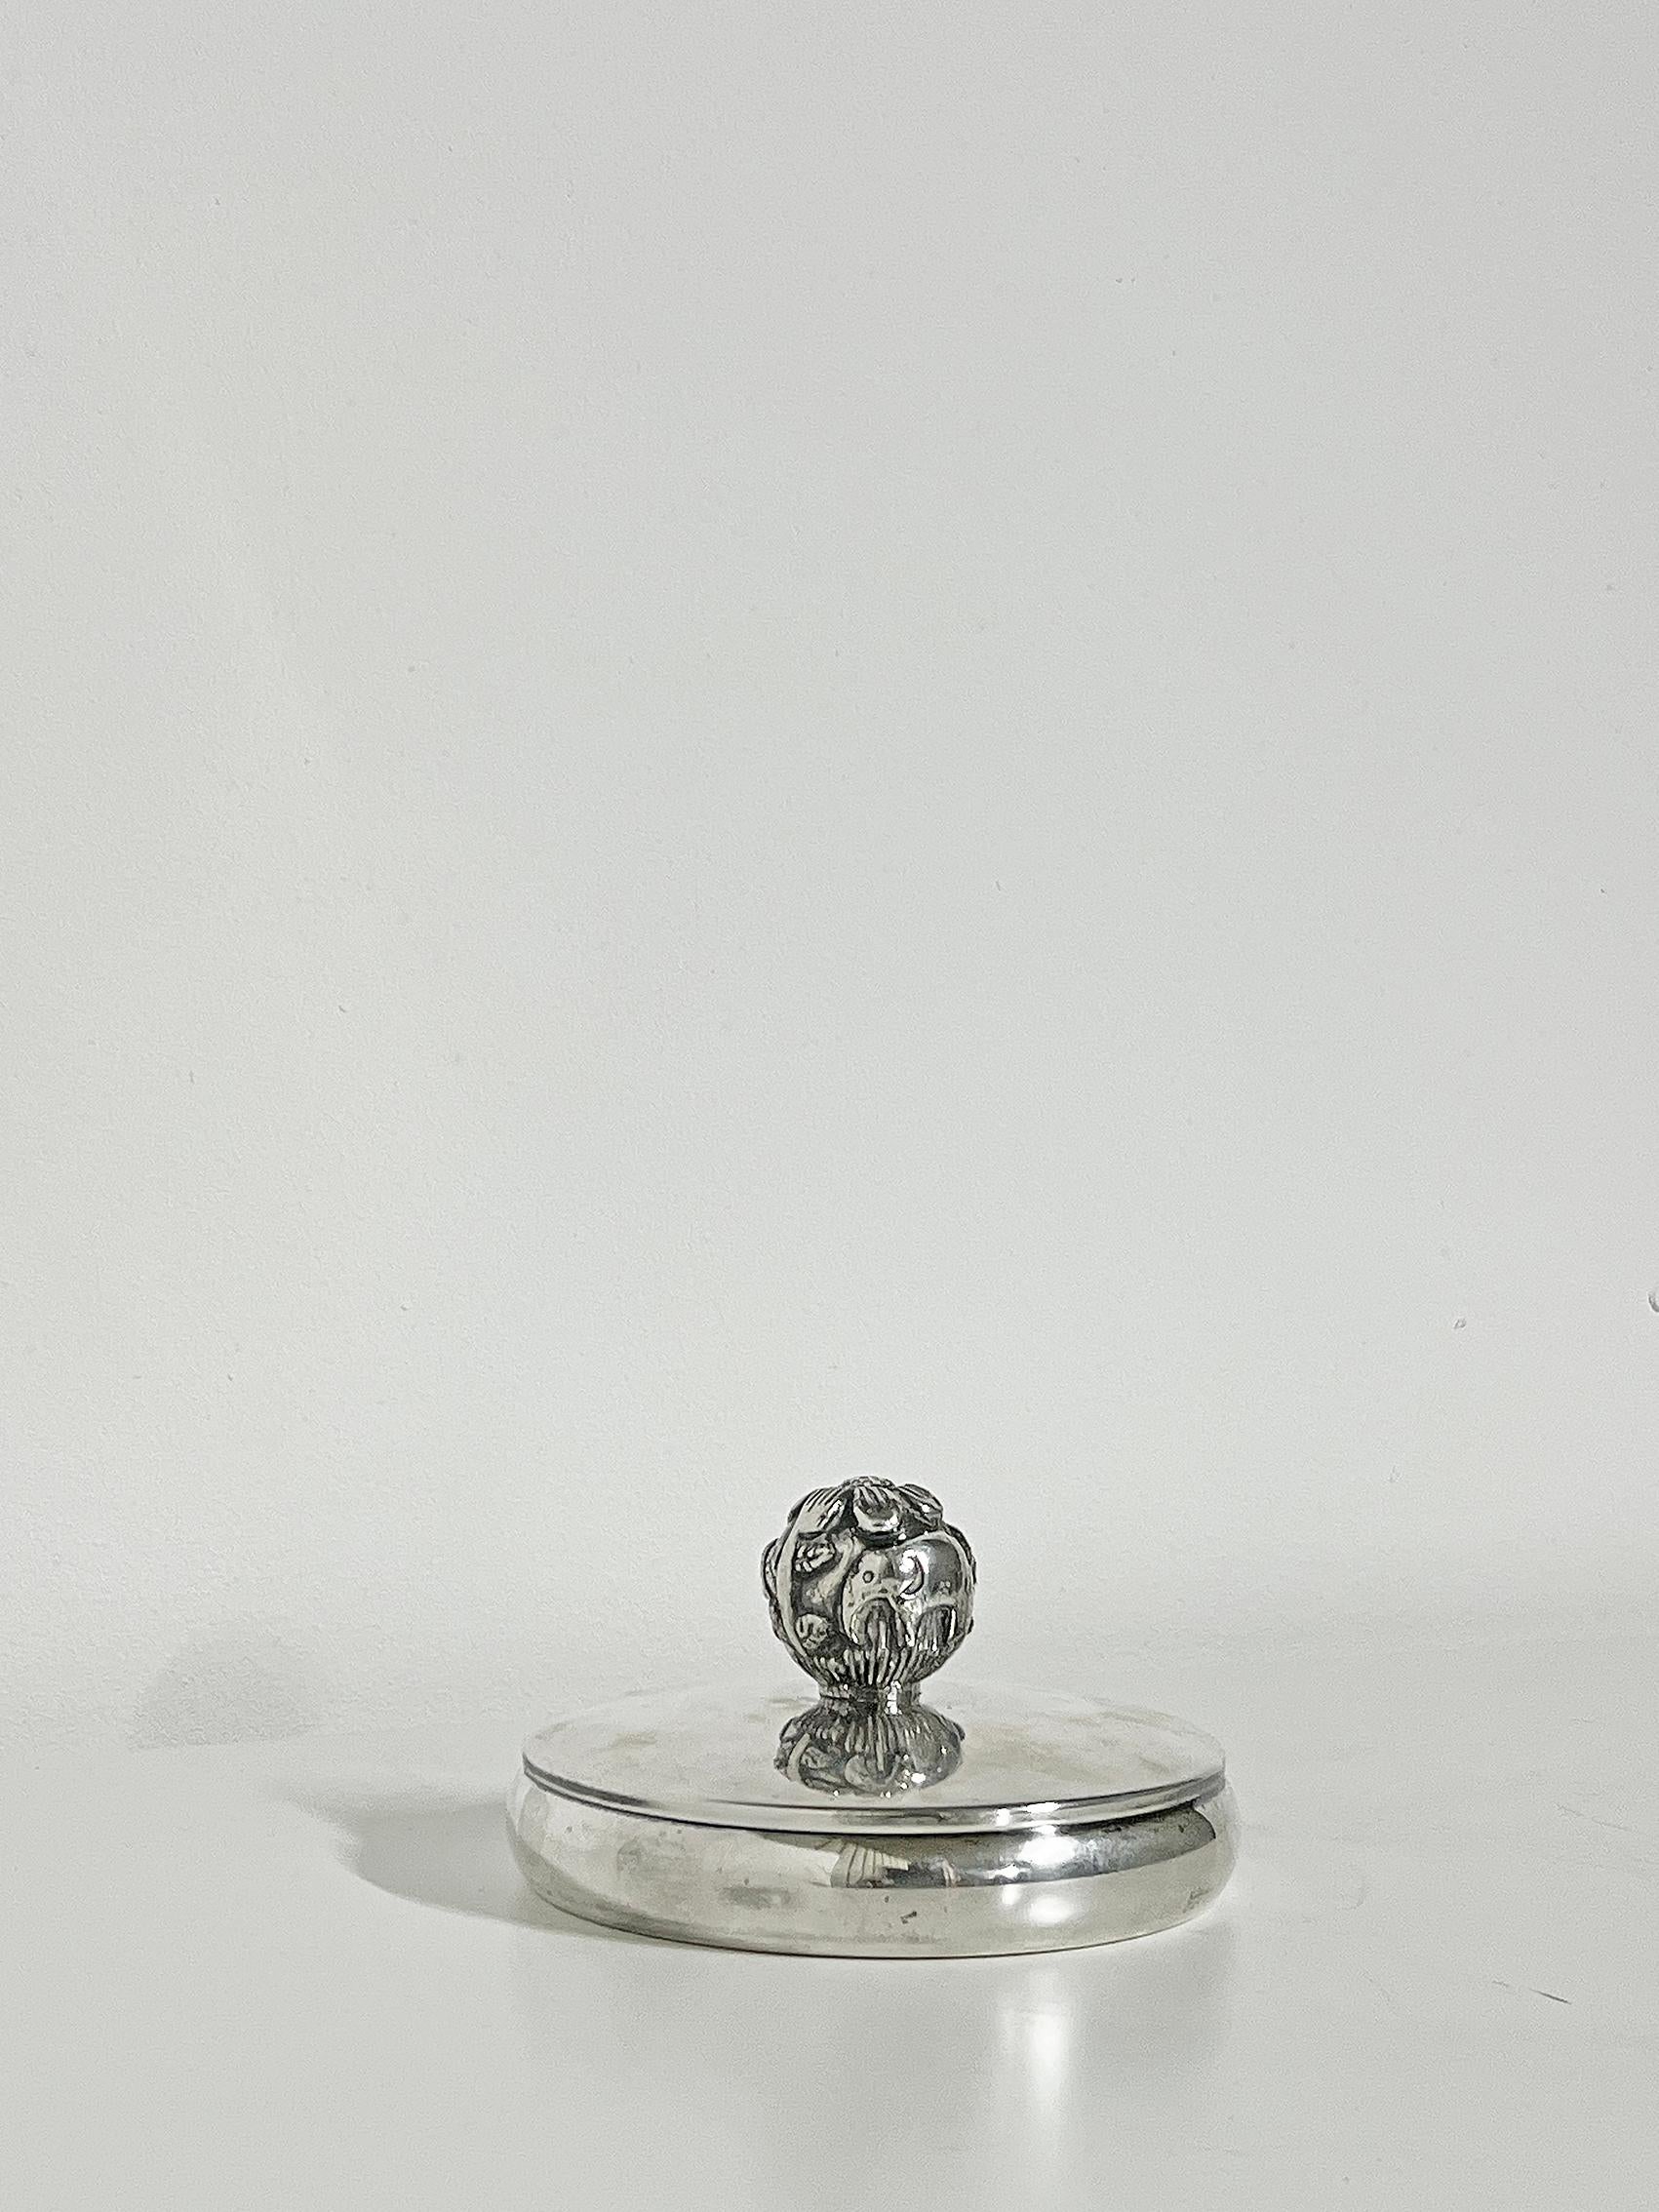 Rare and absolutely stunning, Scandinavian Modern jar in silver plate by Carl Einar Borgström for Ystad-Metall, ca 1930's. Handle with decoration of elephant, flowers & fish. Signed with makers mark.
Good vintage condition, wear and patina